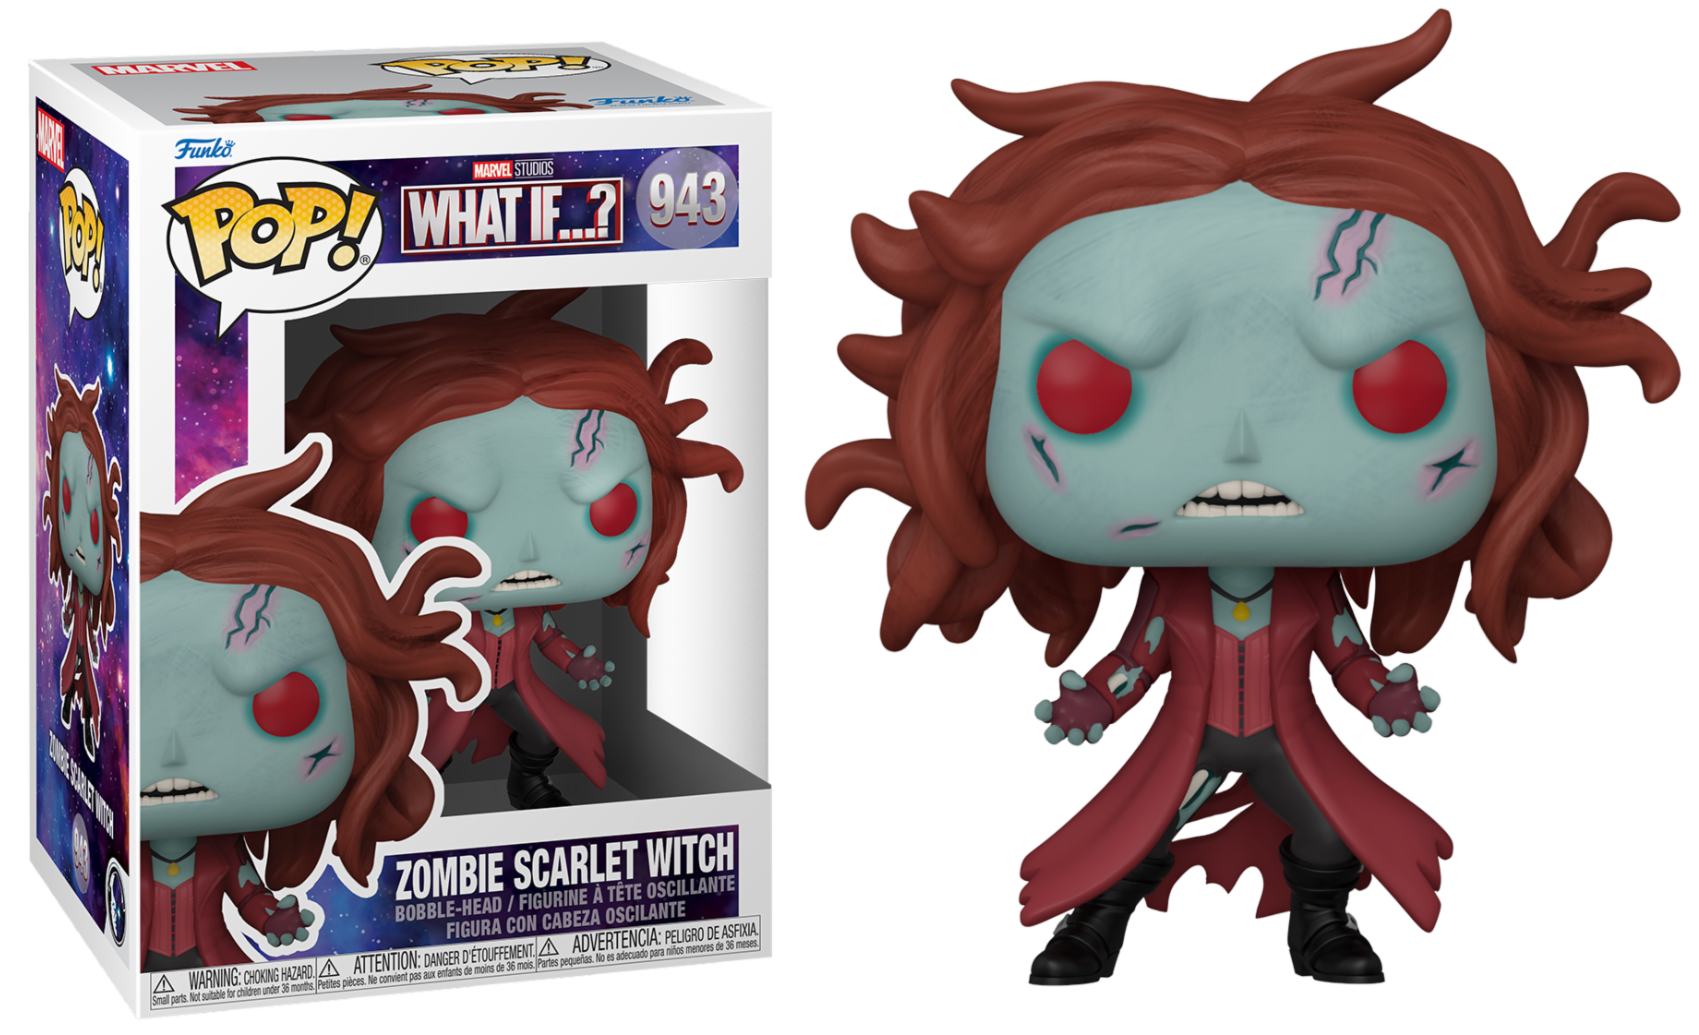 MARVEL WHAT IF POP N° 943 Zombie Scarlet Witch